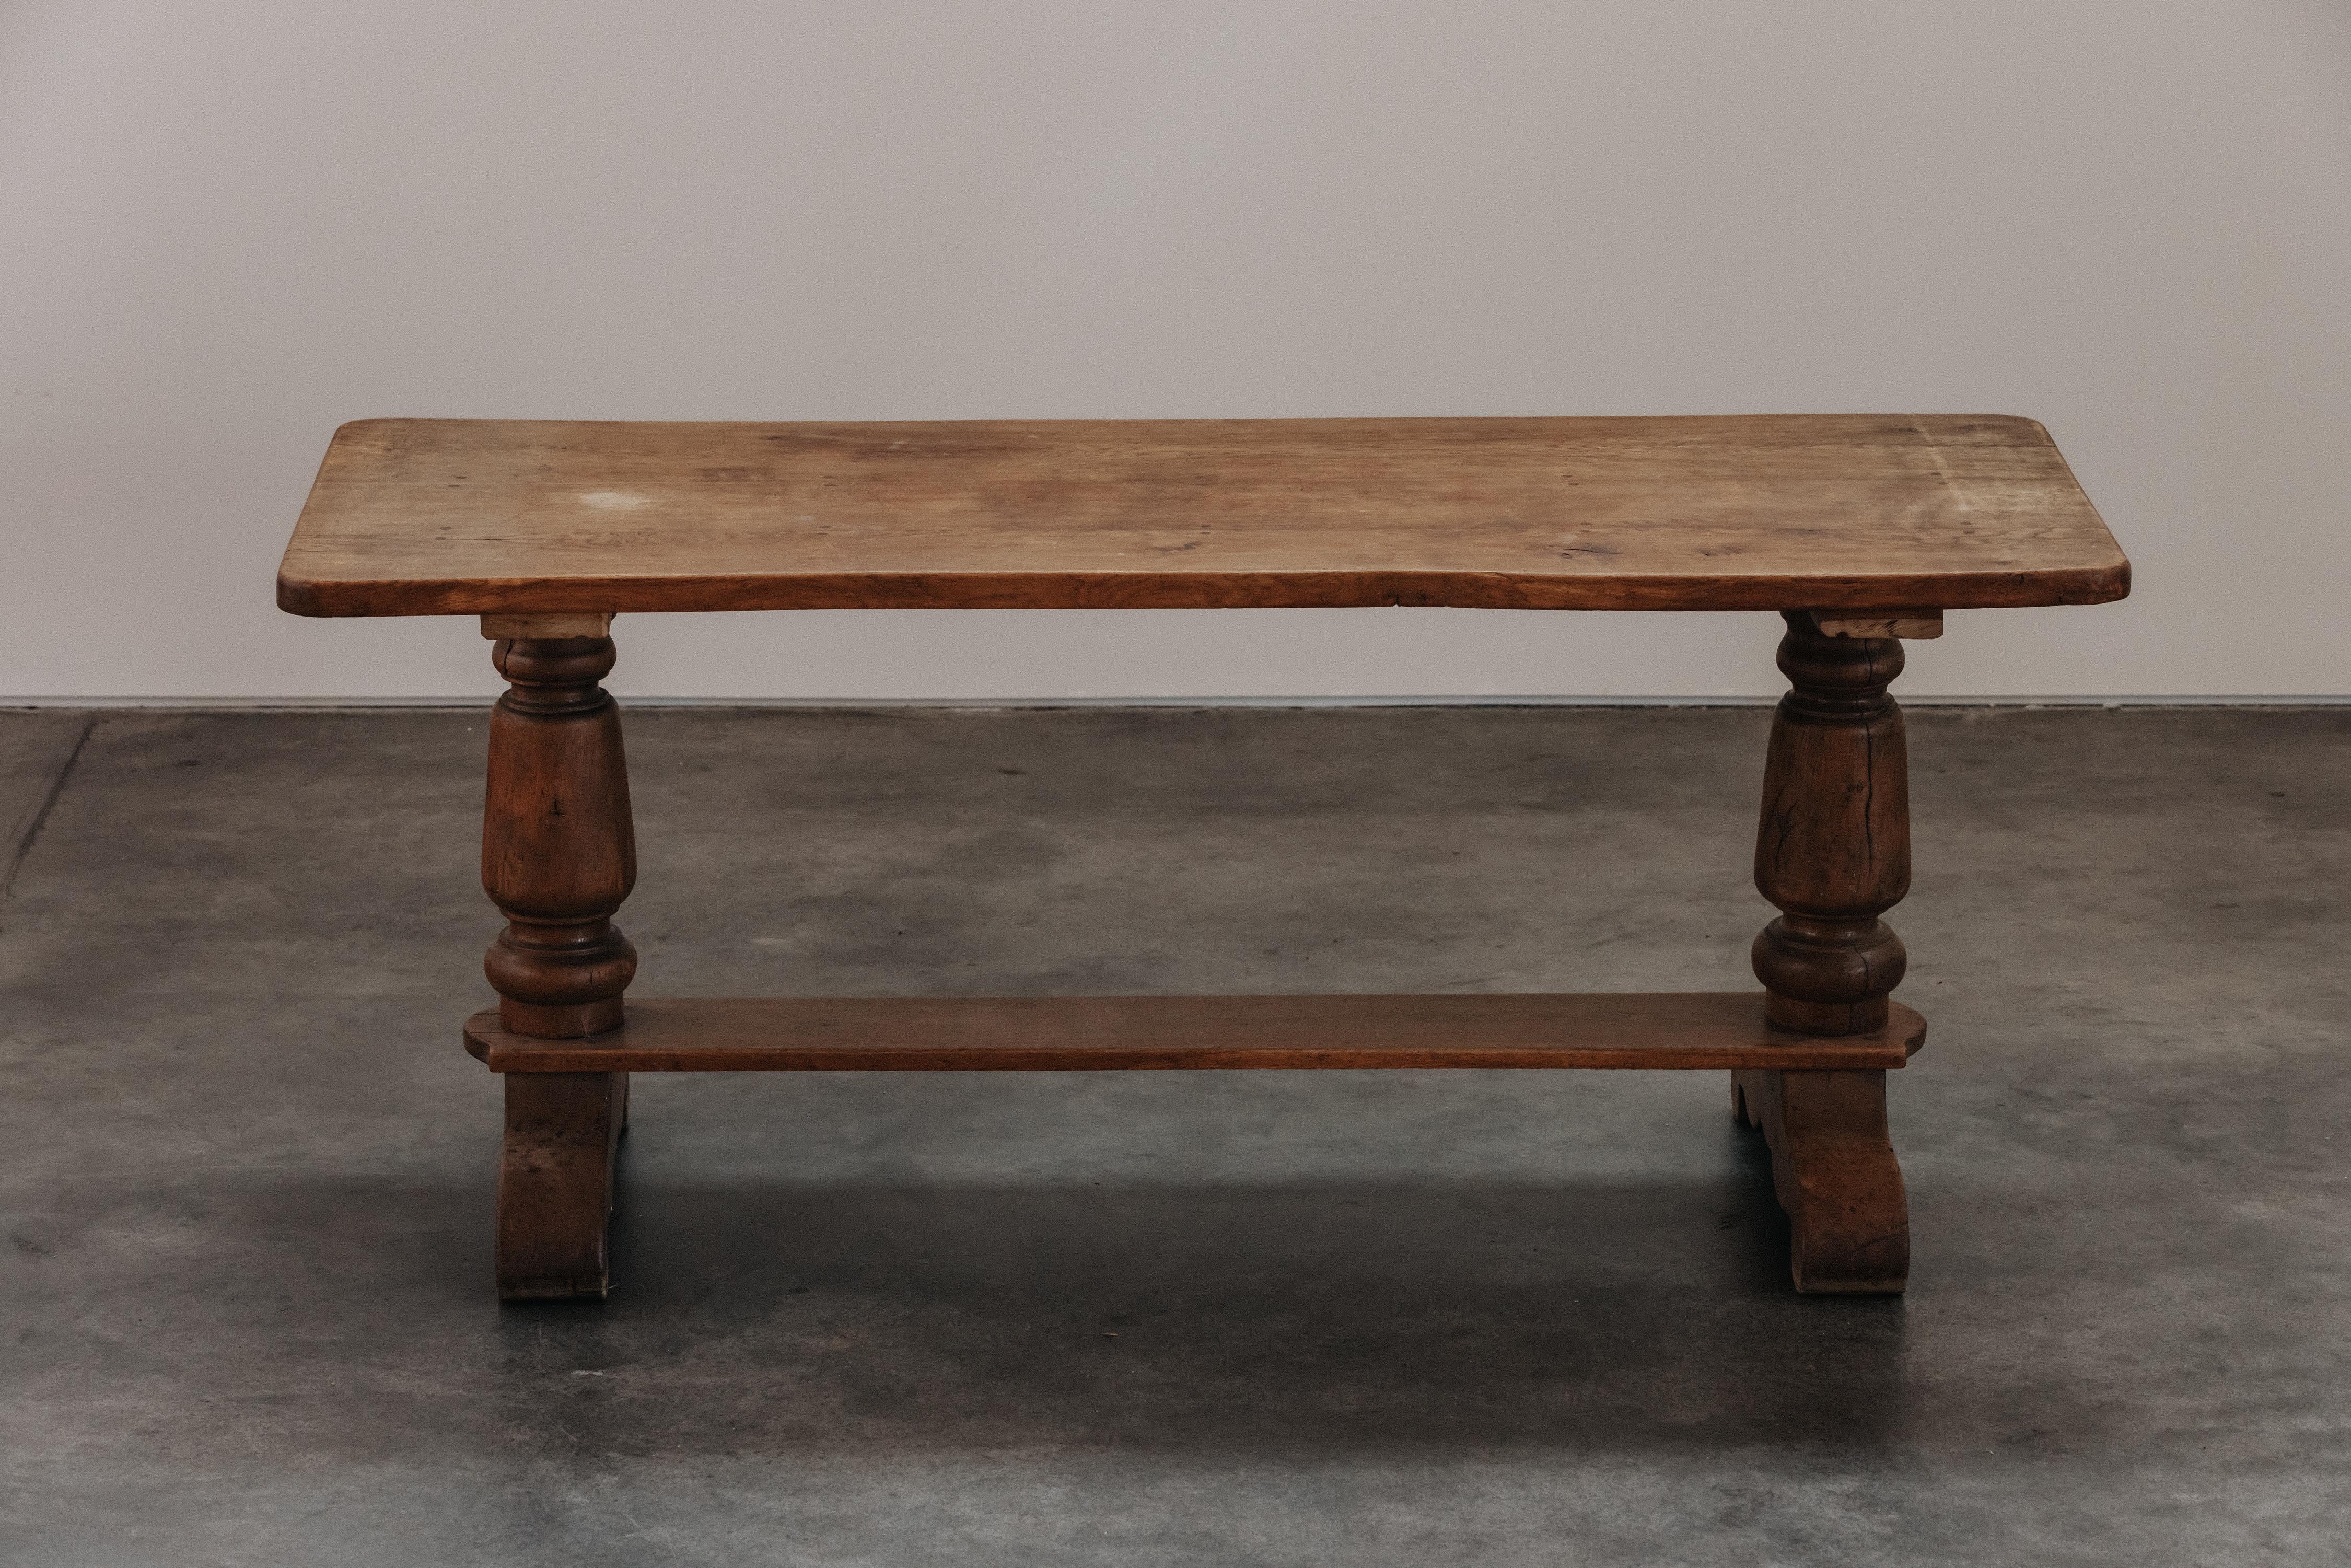 Vintage Stone Garden Table From France, Circa 1940 For Sale 3